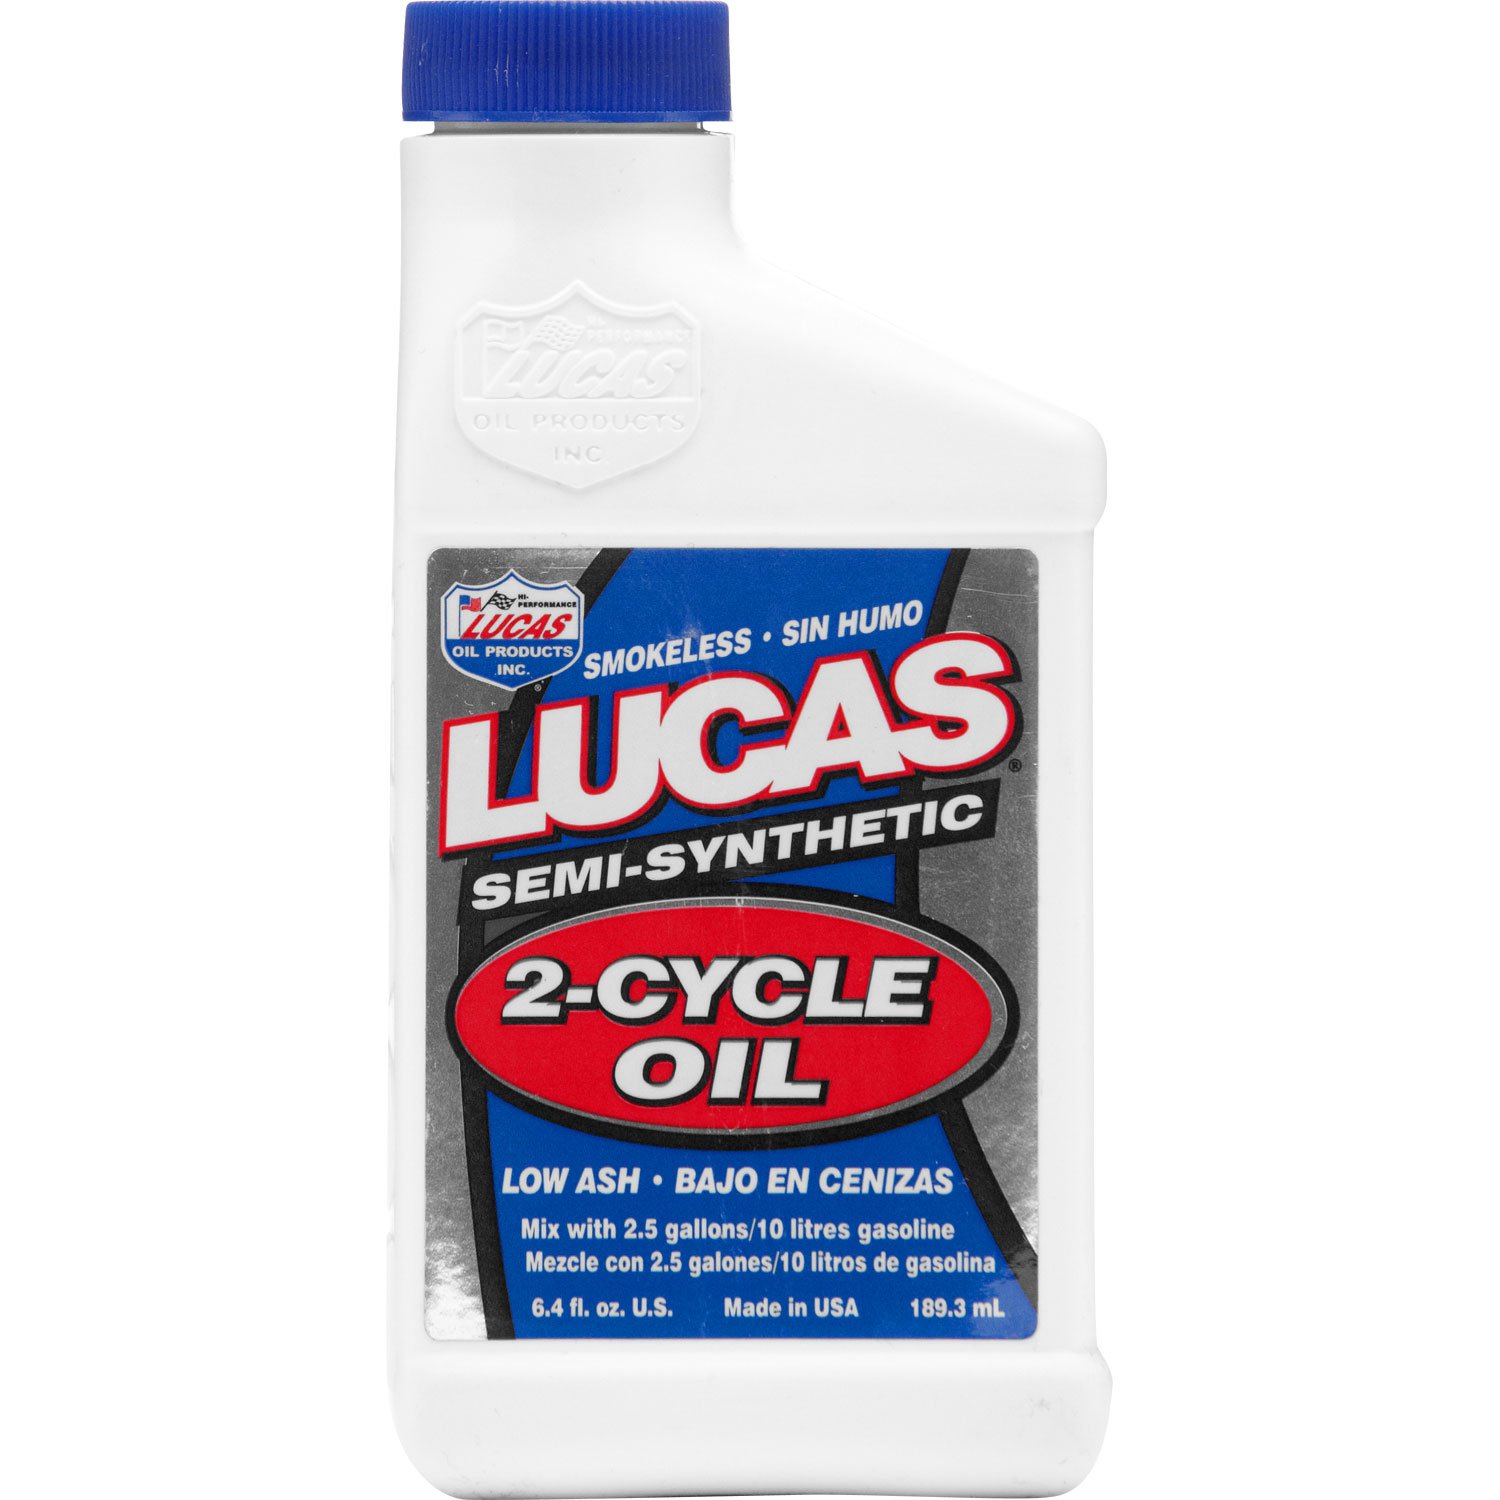 Semi-Synthetic 2-Cycle High-Temp Racing Oil 6.4 oz Bottle